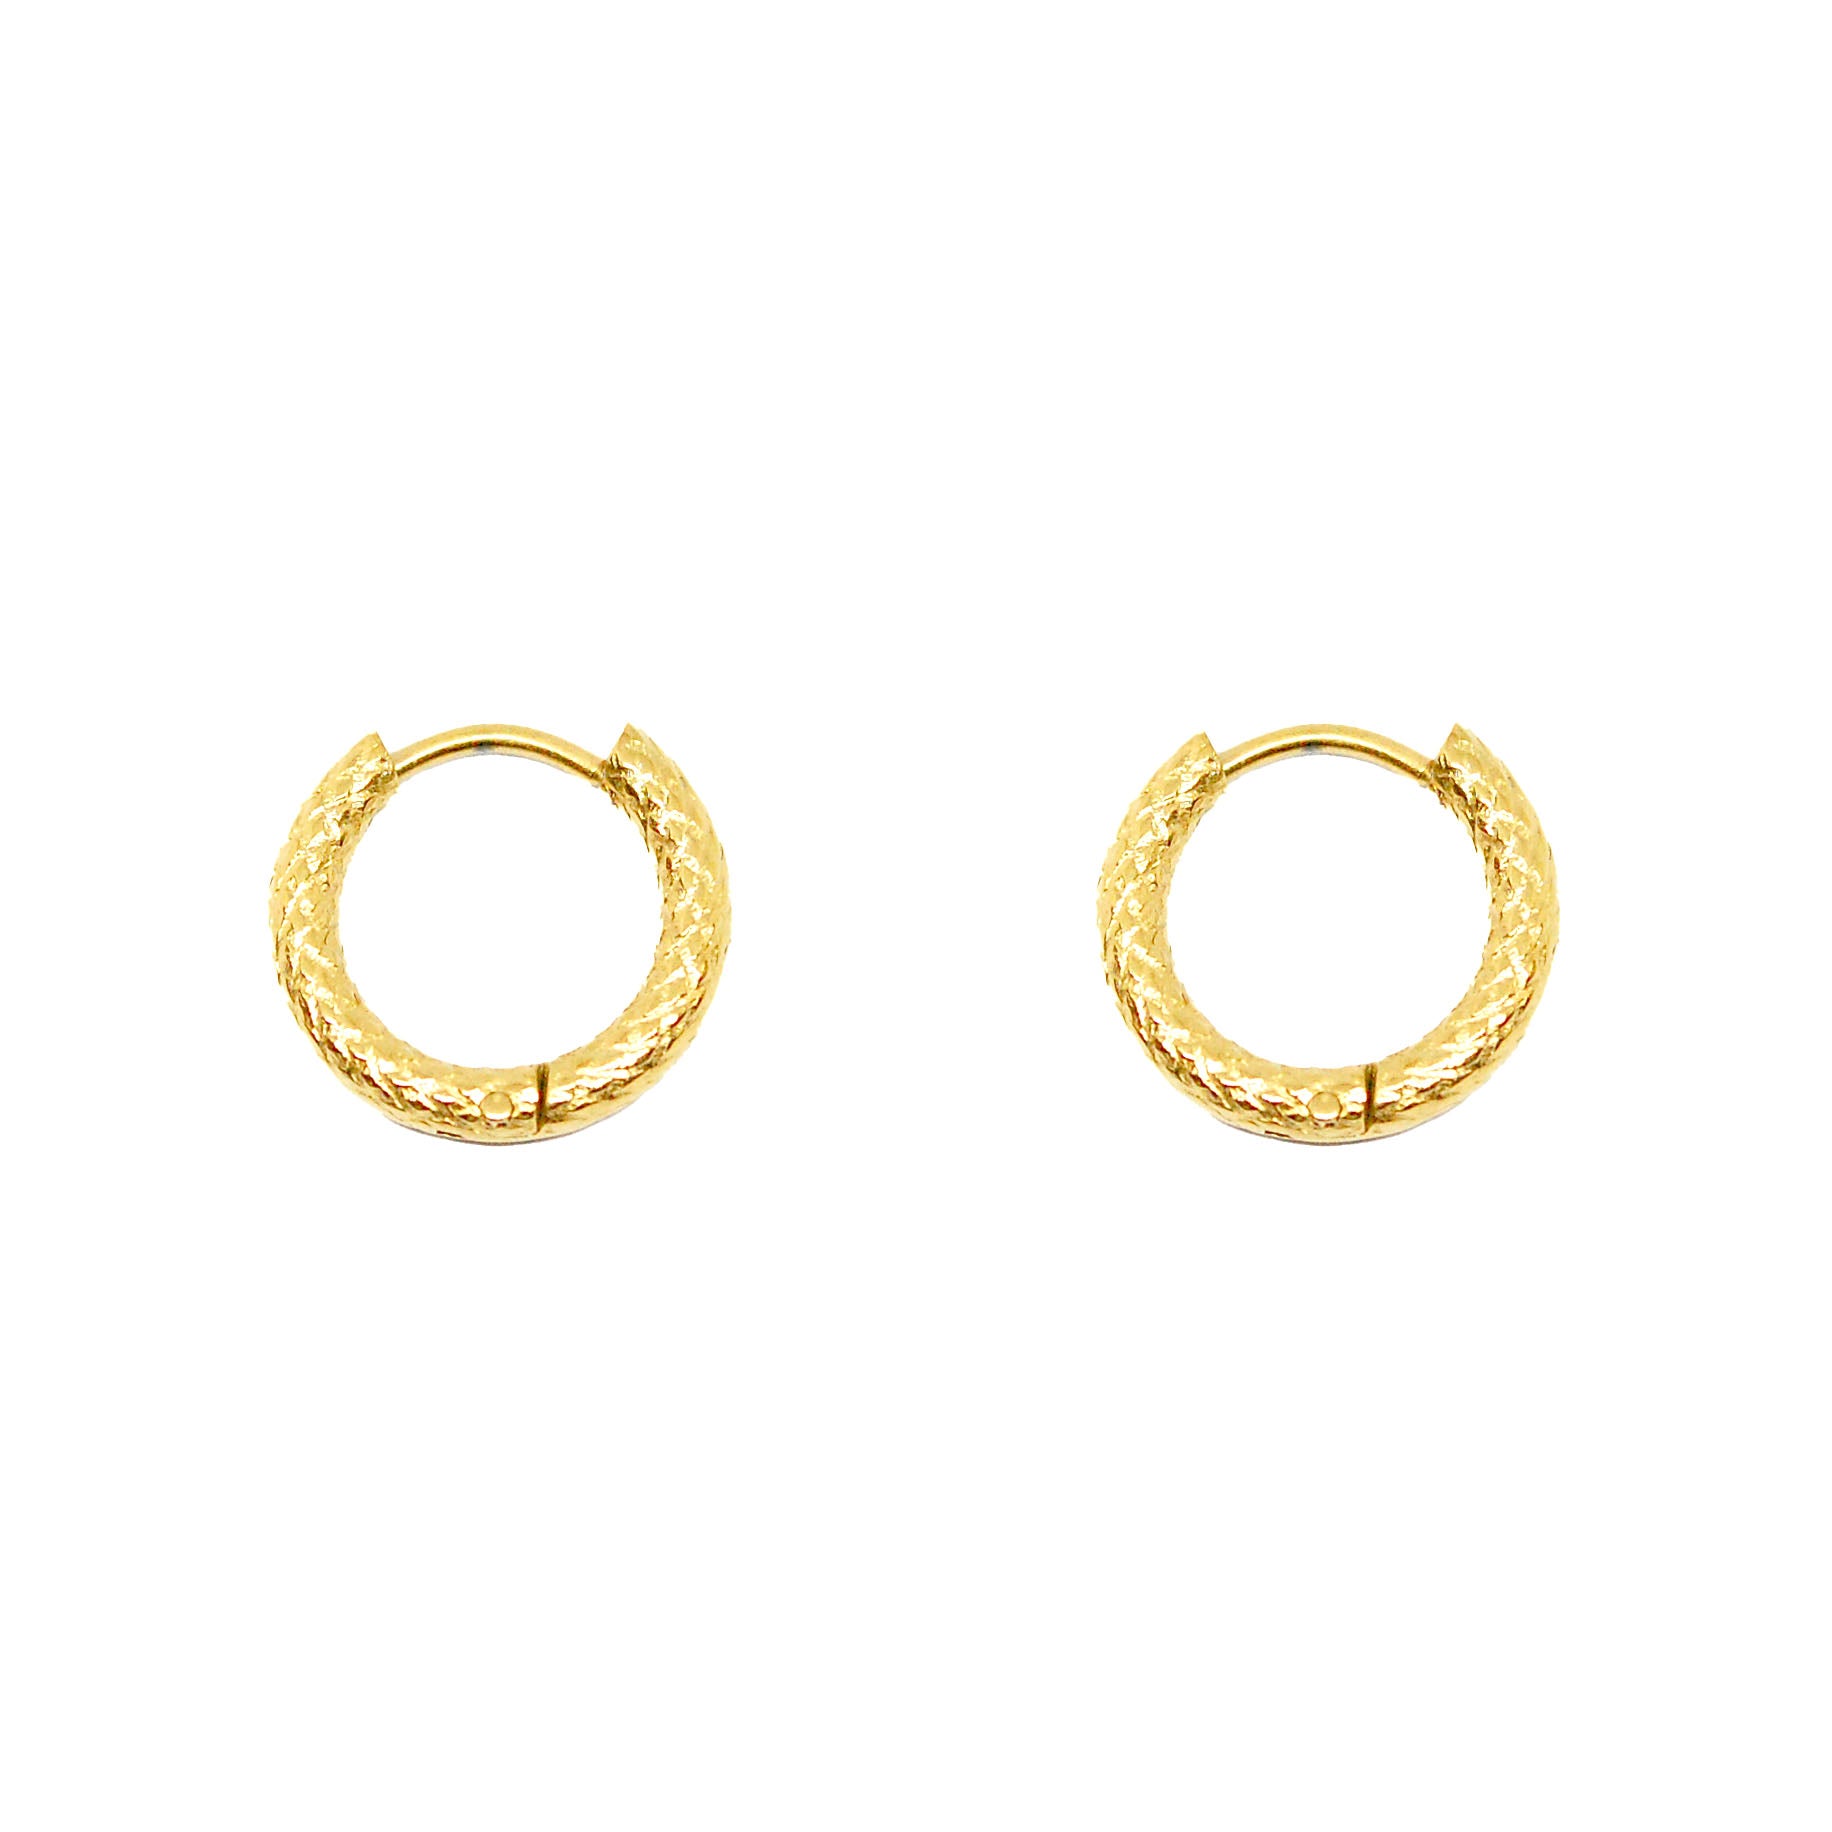 ESE 7997: All IPG 15mm Delicately Etched Hoops